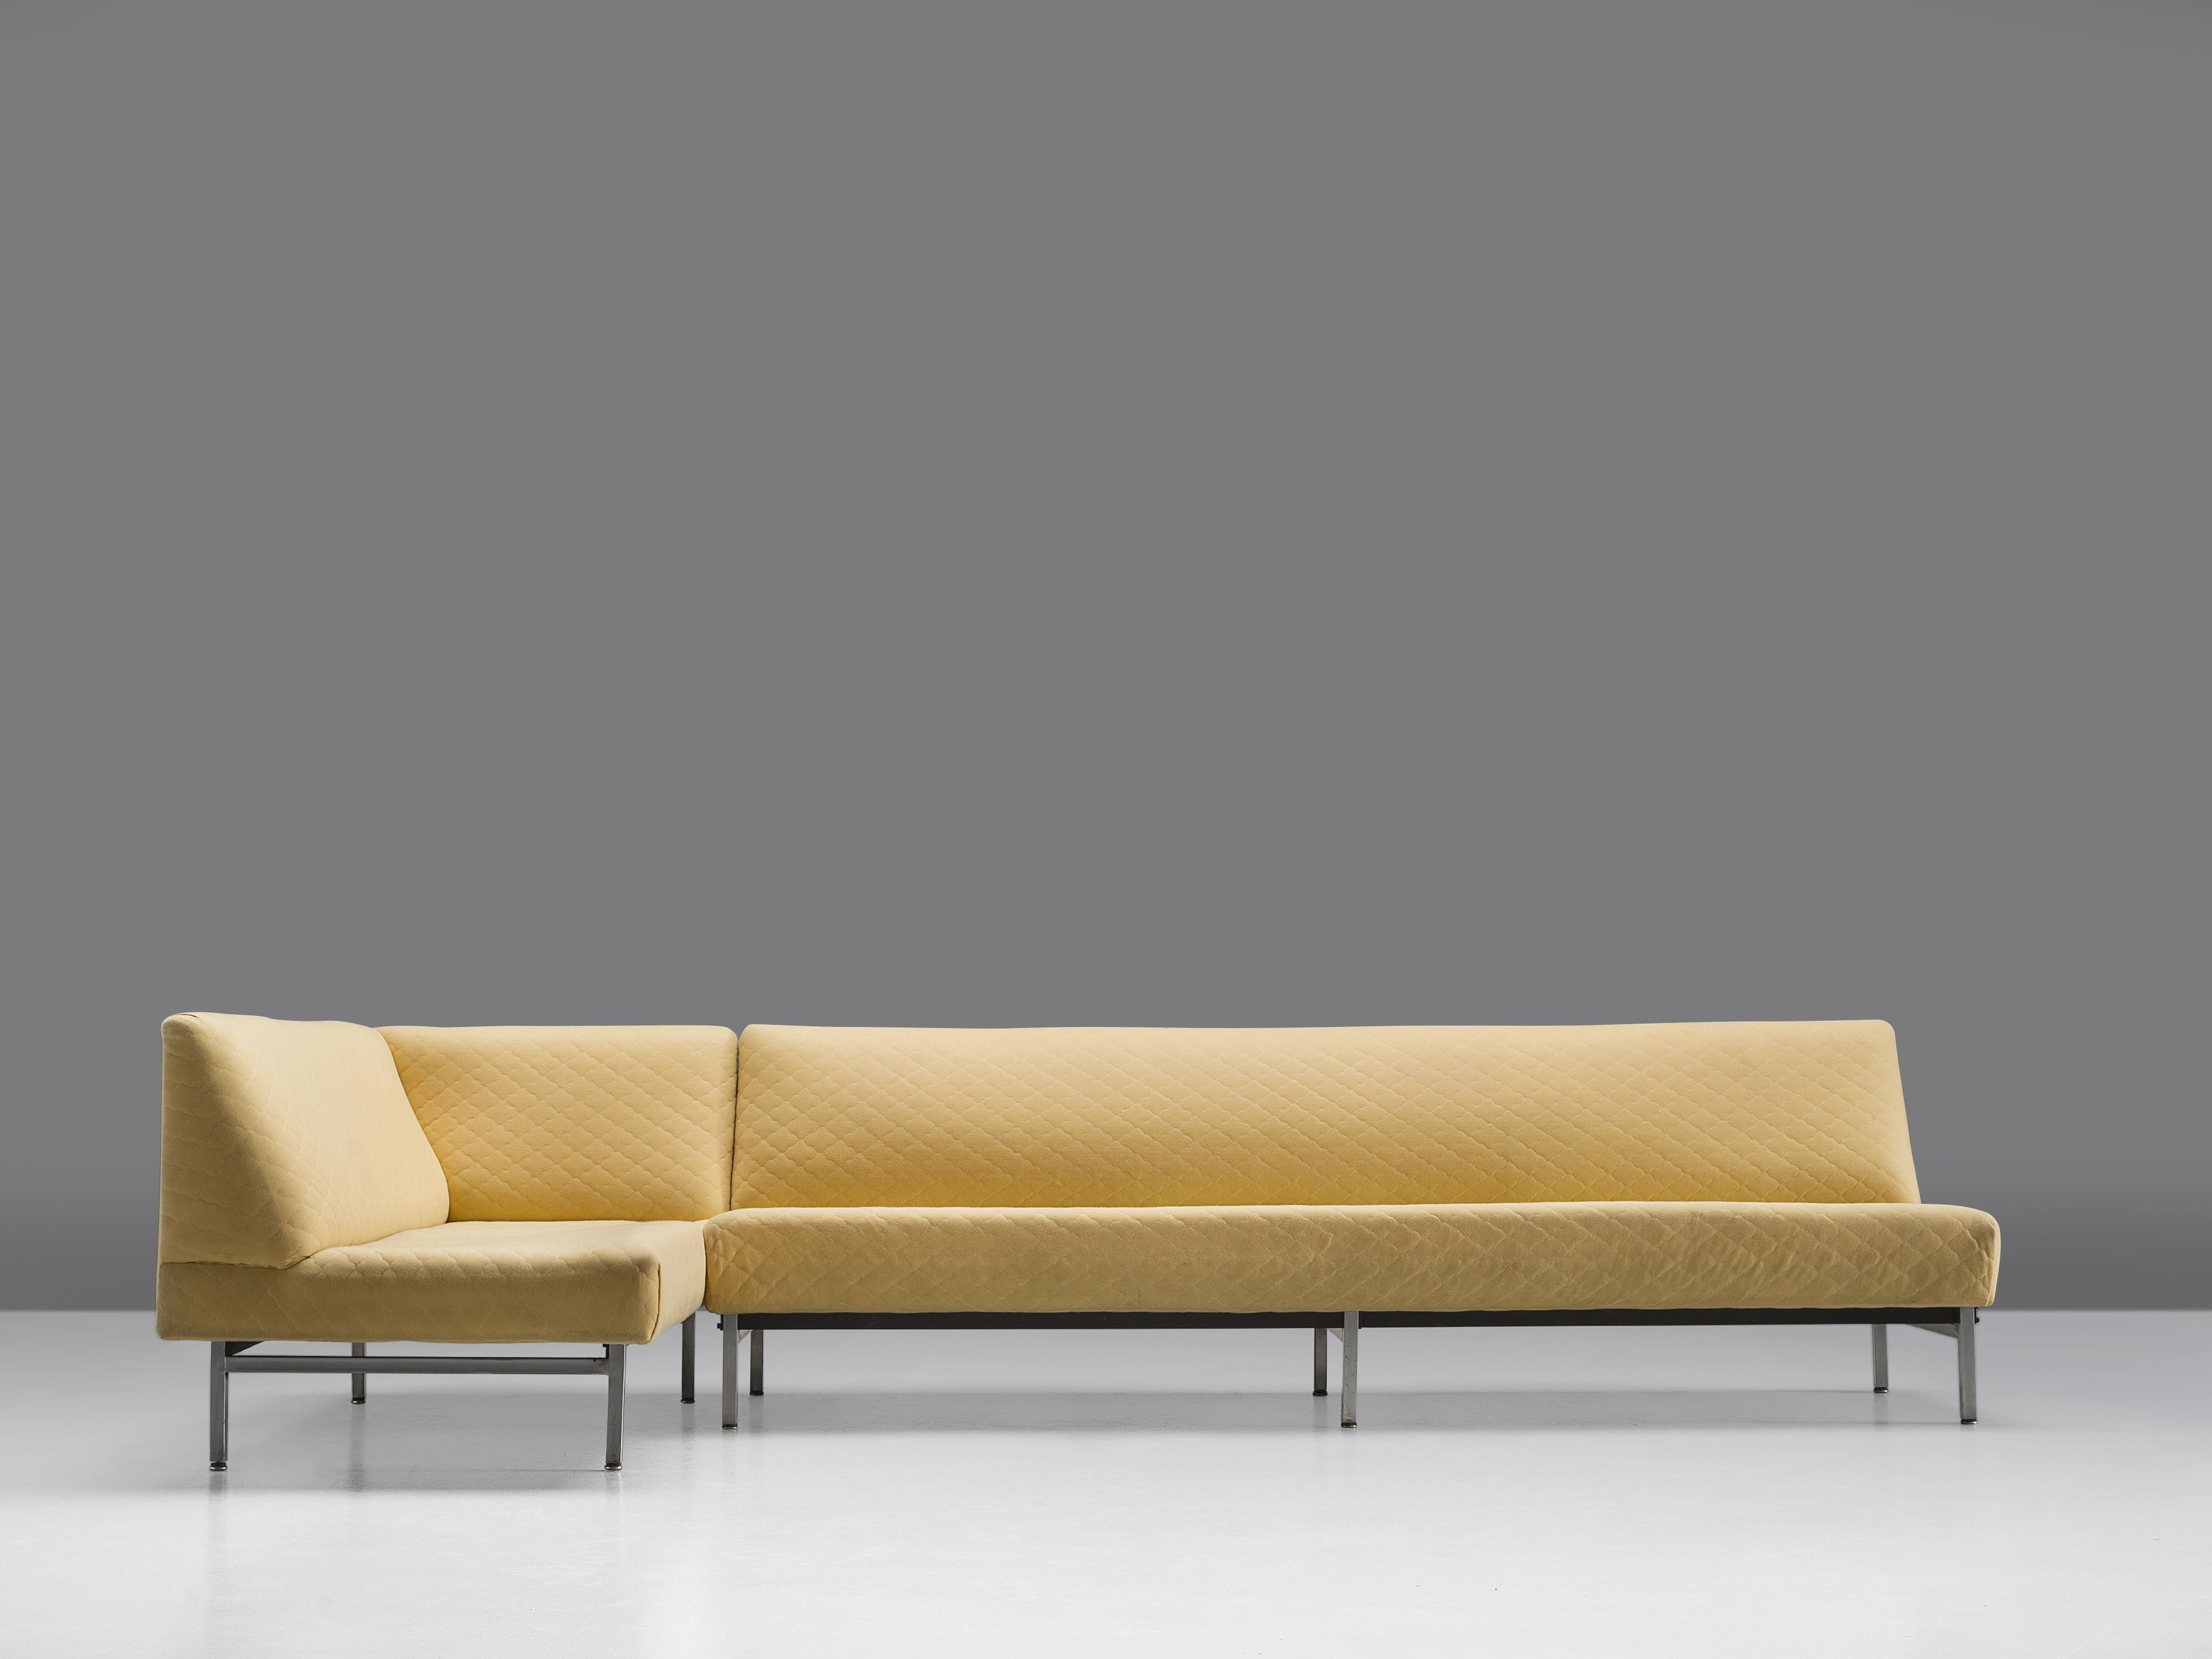 Modular sectional sofa, structured yellow upholstery, metal, United States, 1960s

This two-part sofa is upholstered in soft yellow structured fabric that emphasizes the strong lines of the piece. The two different parts can be placed together to